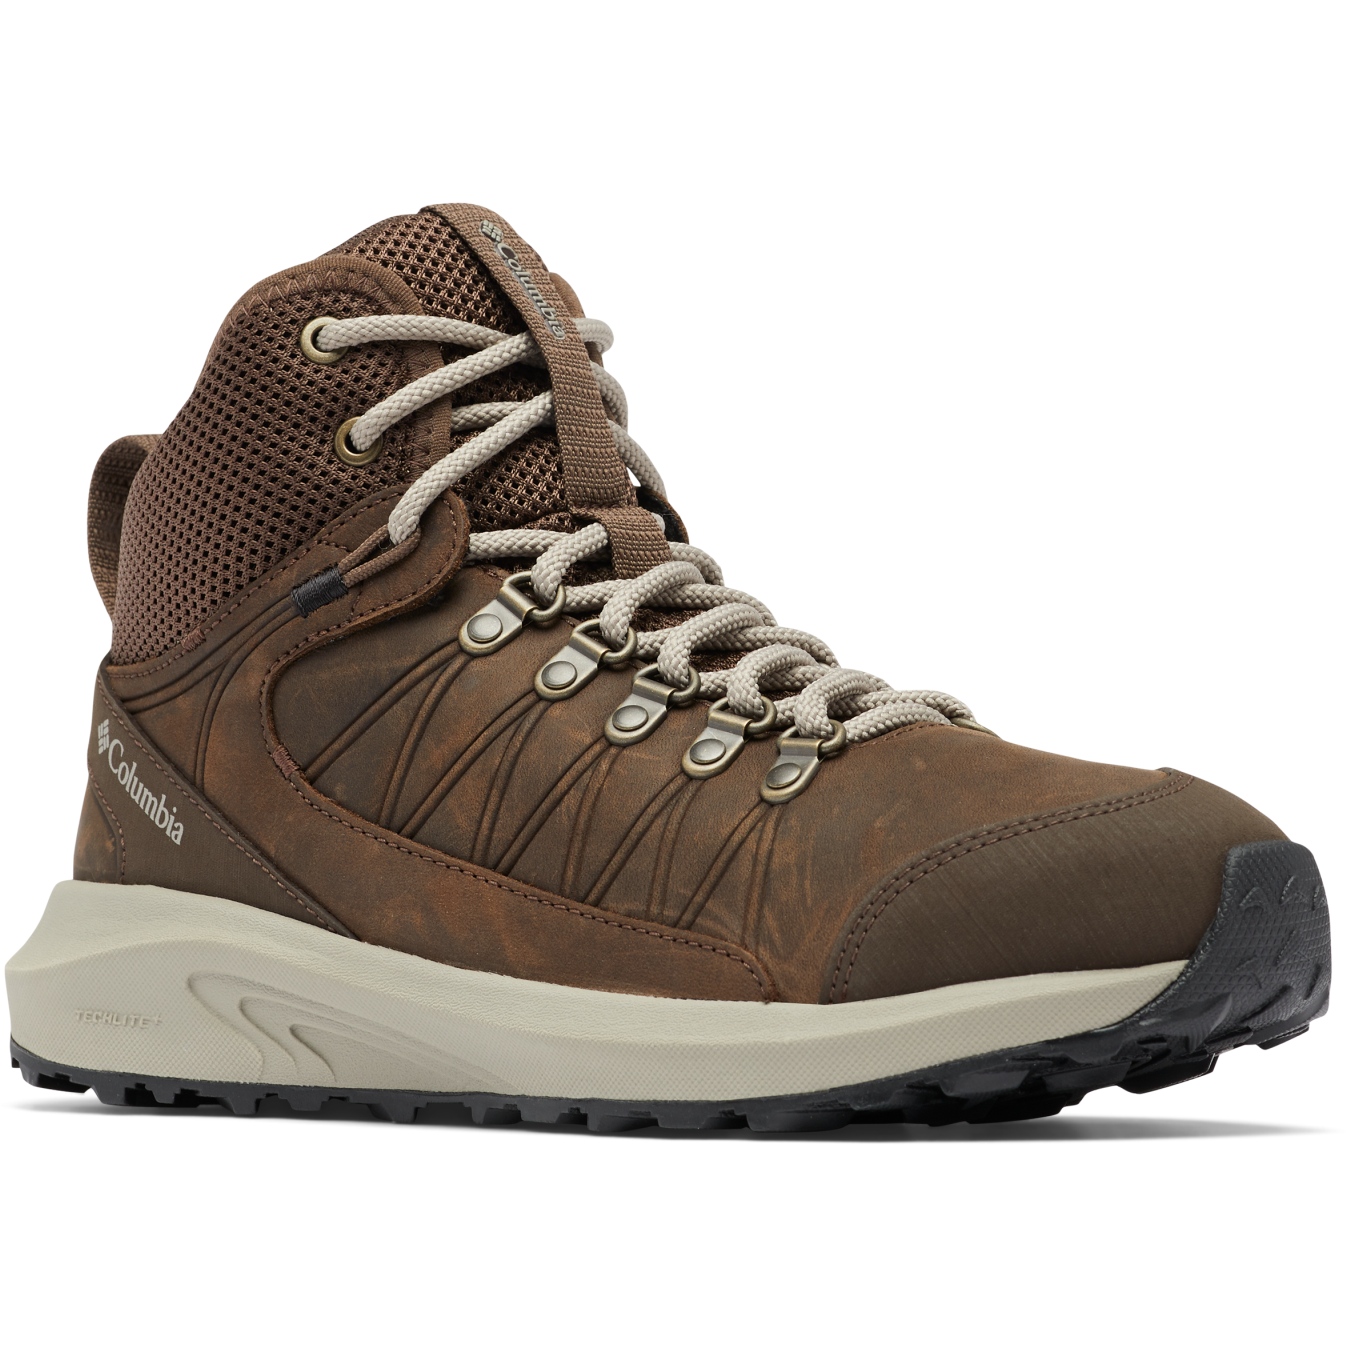 Picture of Columbia Trailstorm Crest Mid Waterproof Hiking Shoes Women - Cordovan/Kettle